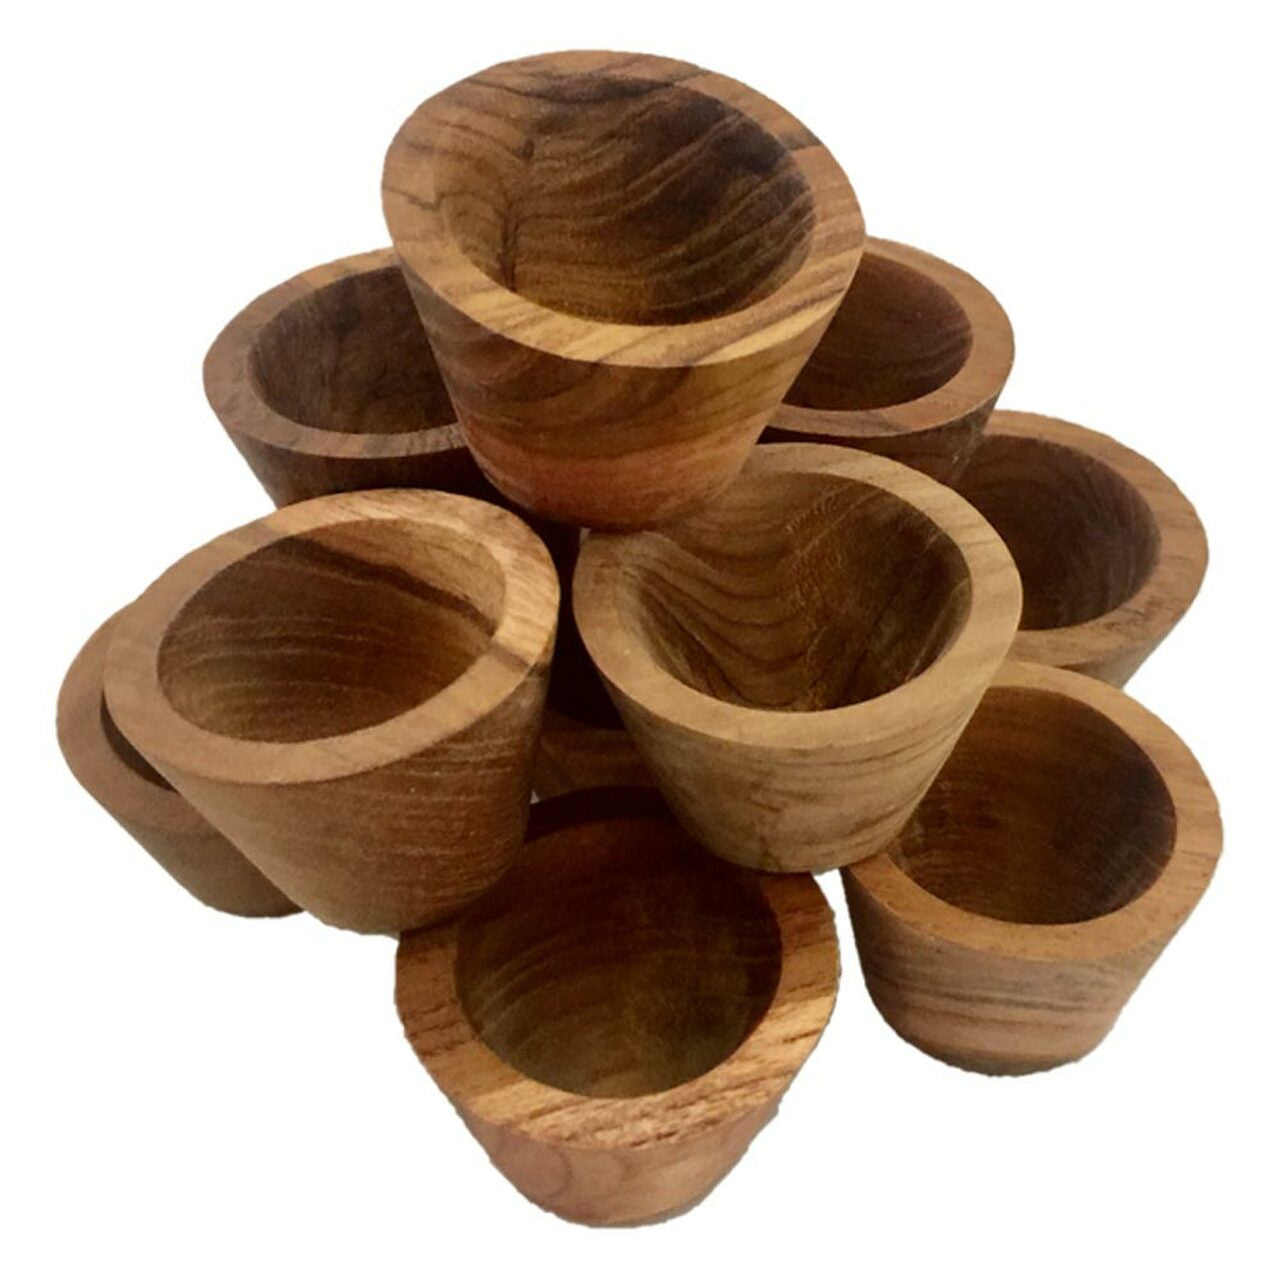 PAPOOSE Open Ended - Loose Parts  - Small Bowls Natural  Wooden - 12 Piece